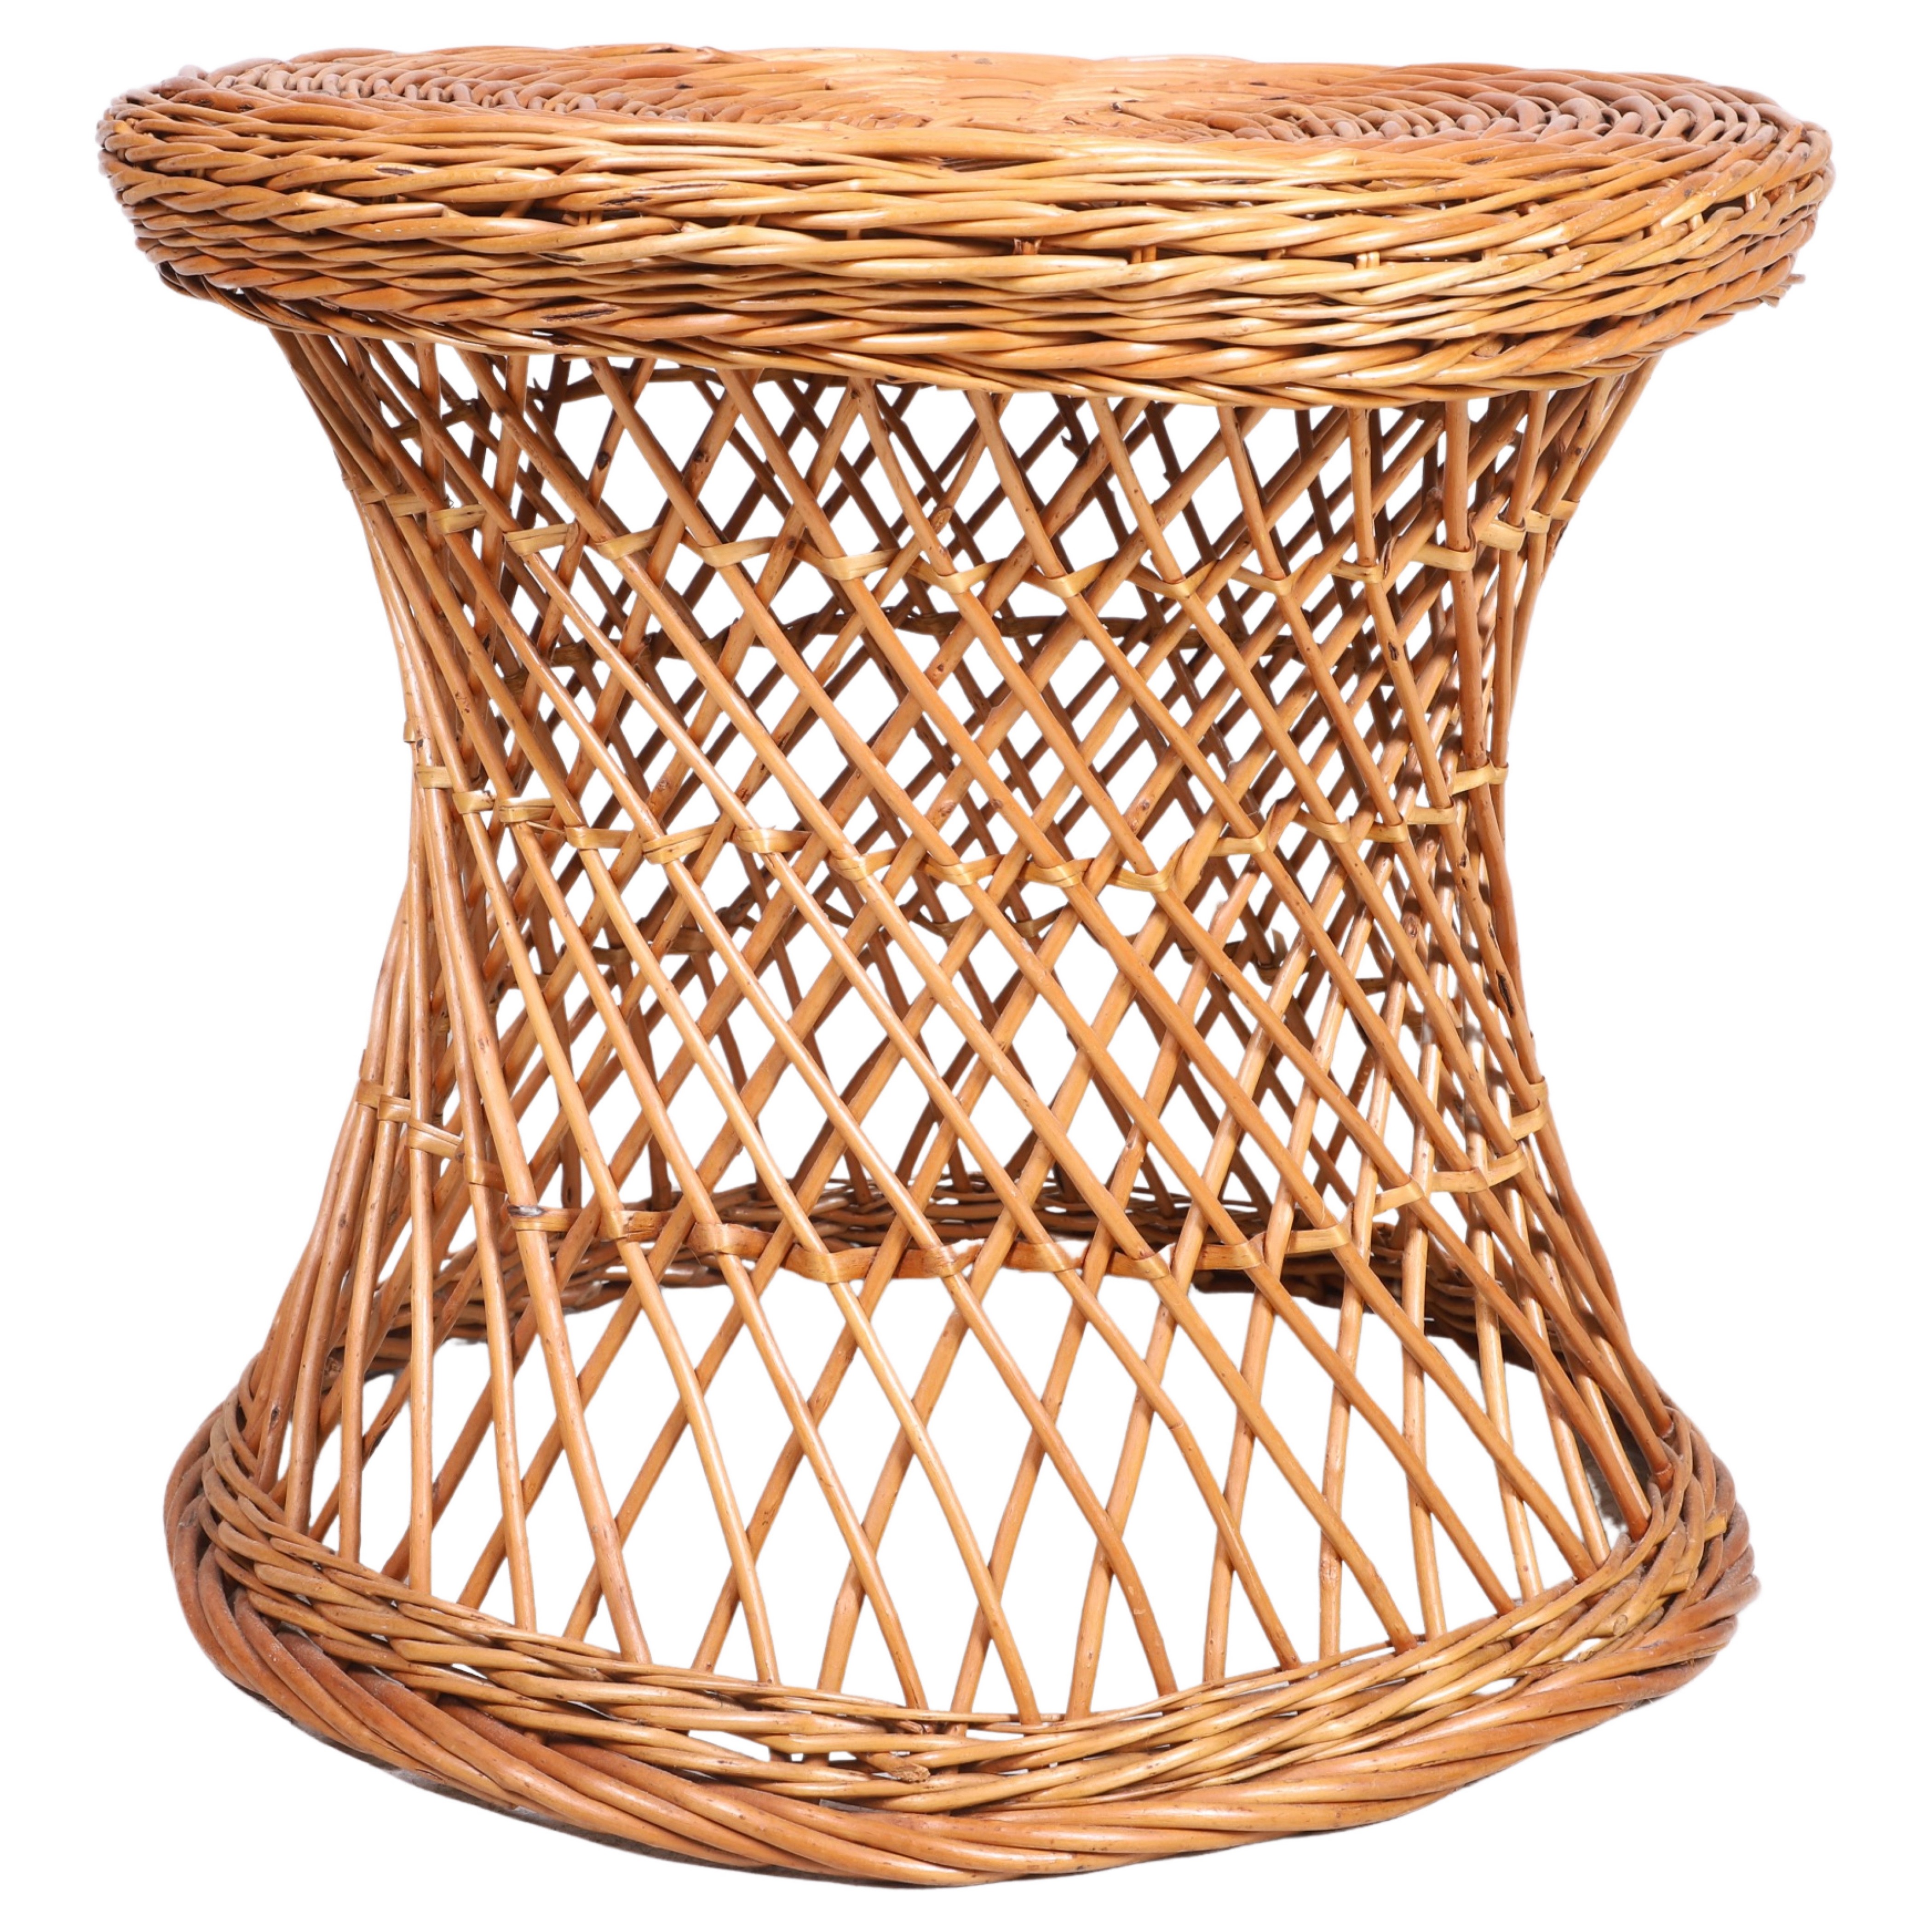 Wicker side table, round top, 19-3/4"h